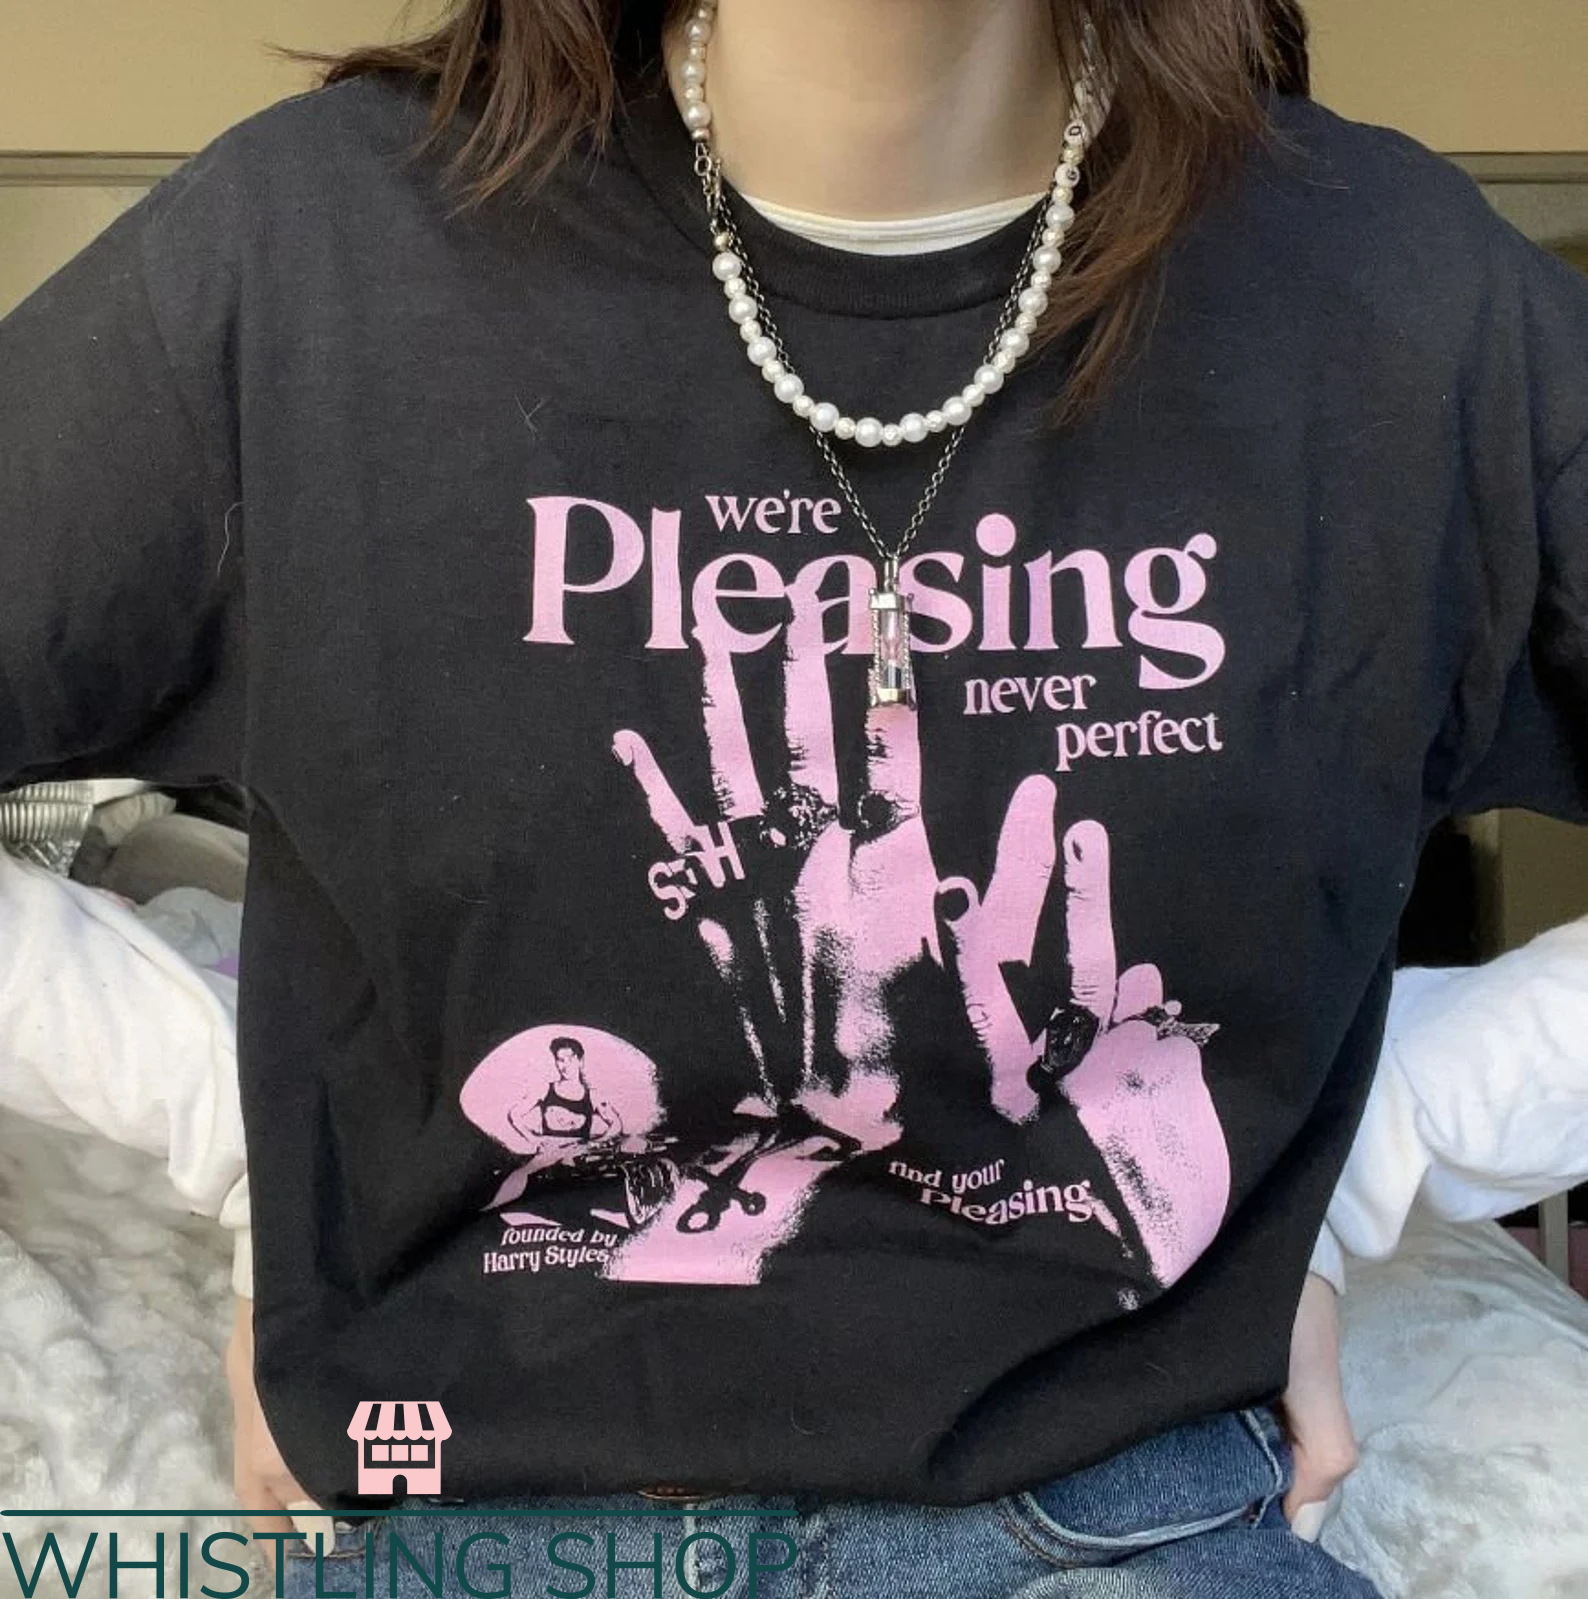 Harry Styles Pleasing T-Shirt We're Pleasing Never Perfect